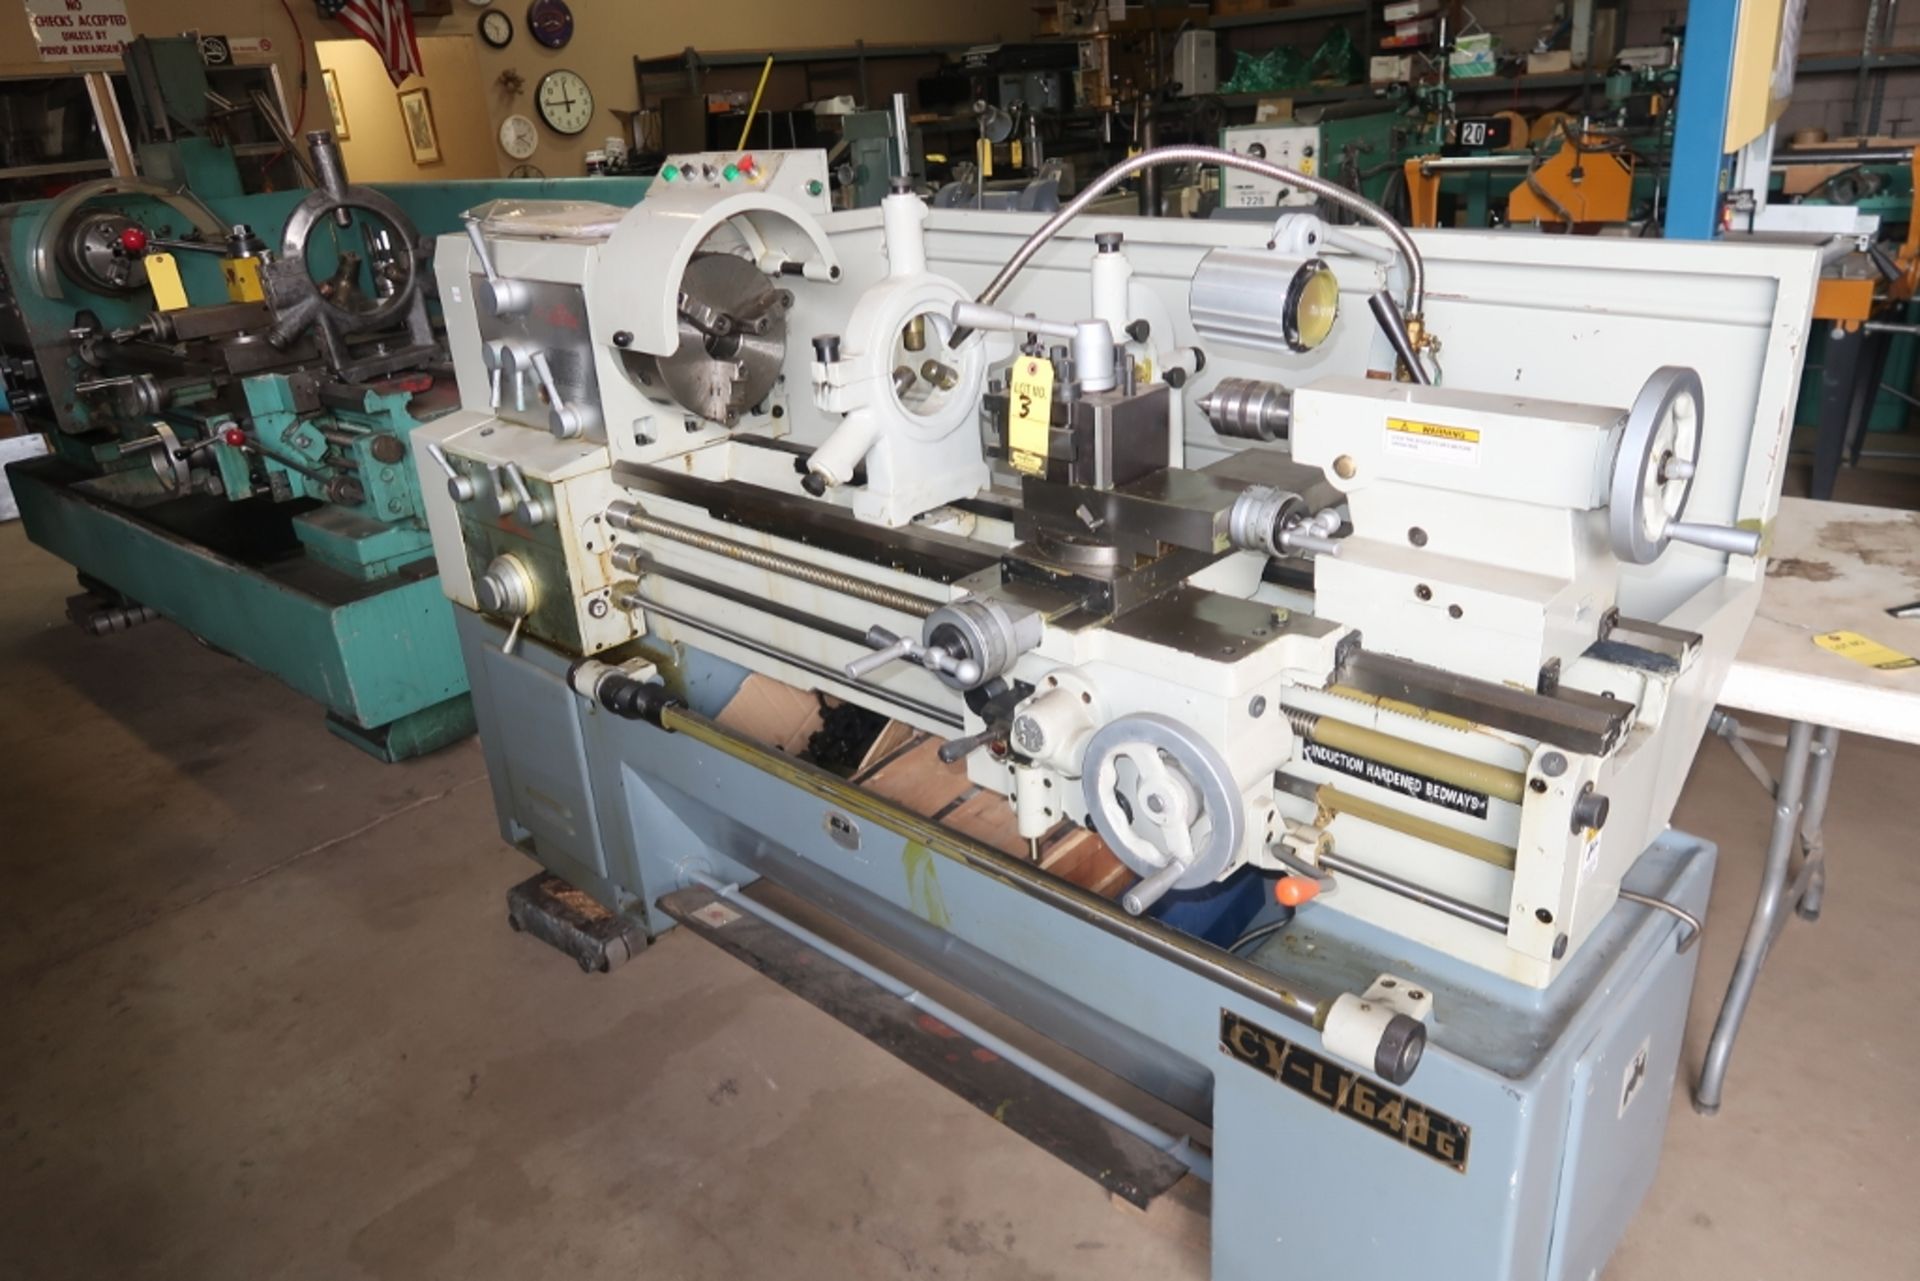 YUNNAN CY-L1640G LATHE W/ 3 JAW CHUCK 60" BED - Image 10 of 10